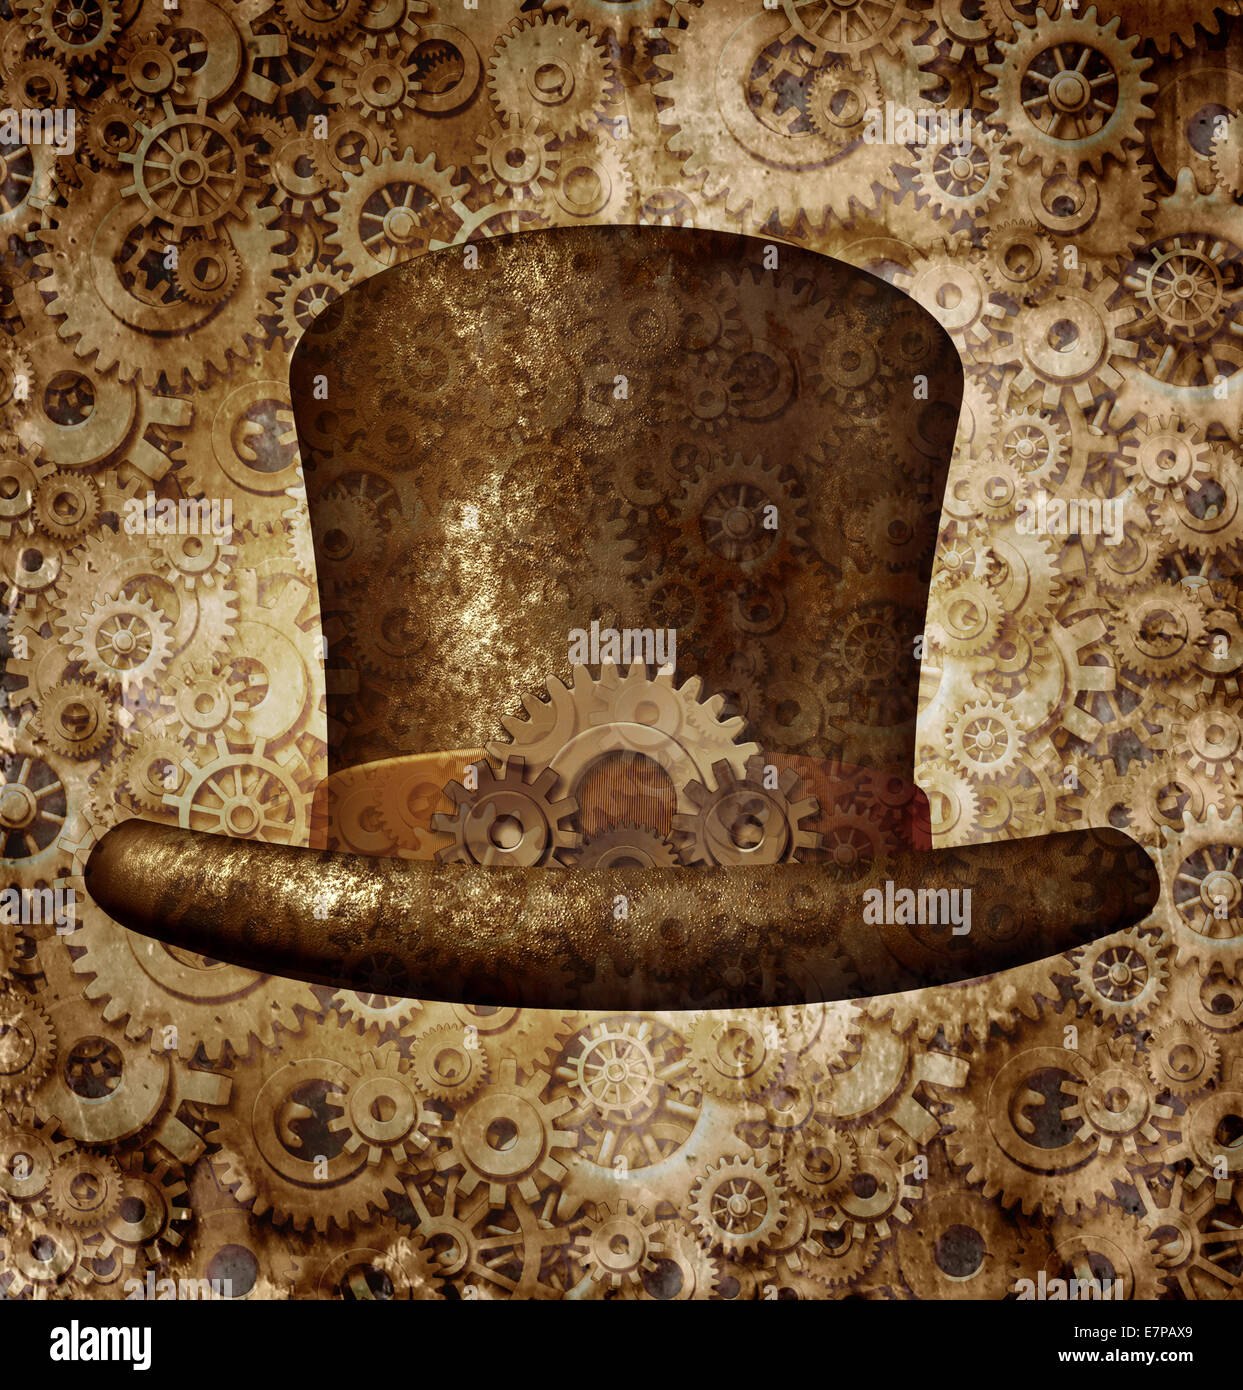 Steampunk top hat as a science fiction concept made of metal copper gears and cogs wearing a historical victorian retro head accessory as a technology symbol of futuristic fictional machine hybrid. Stock Photo